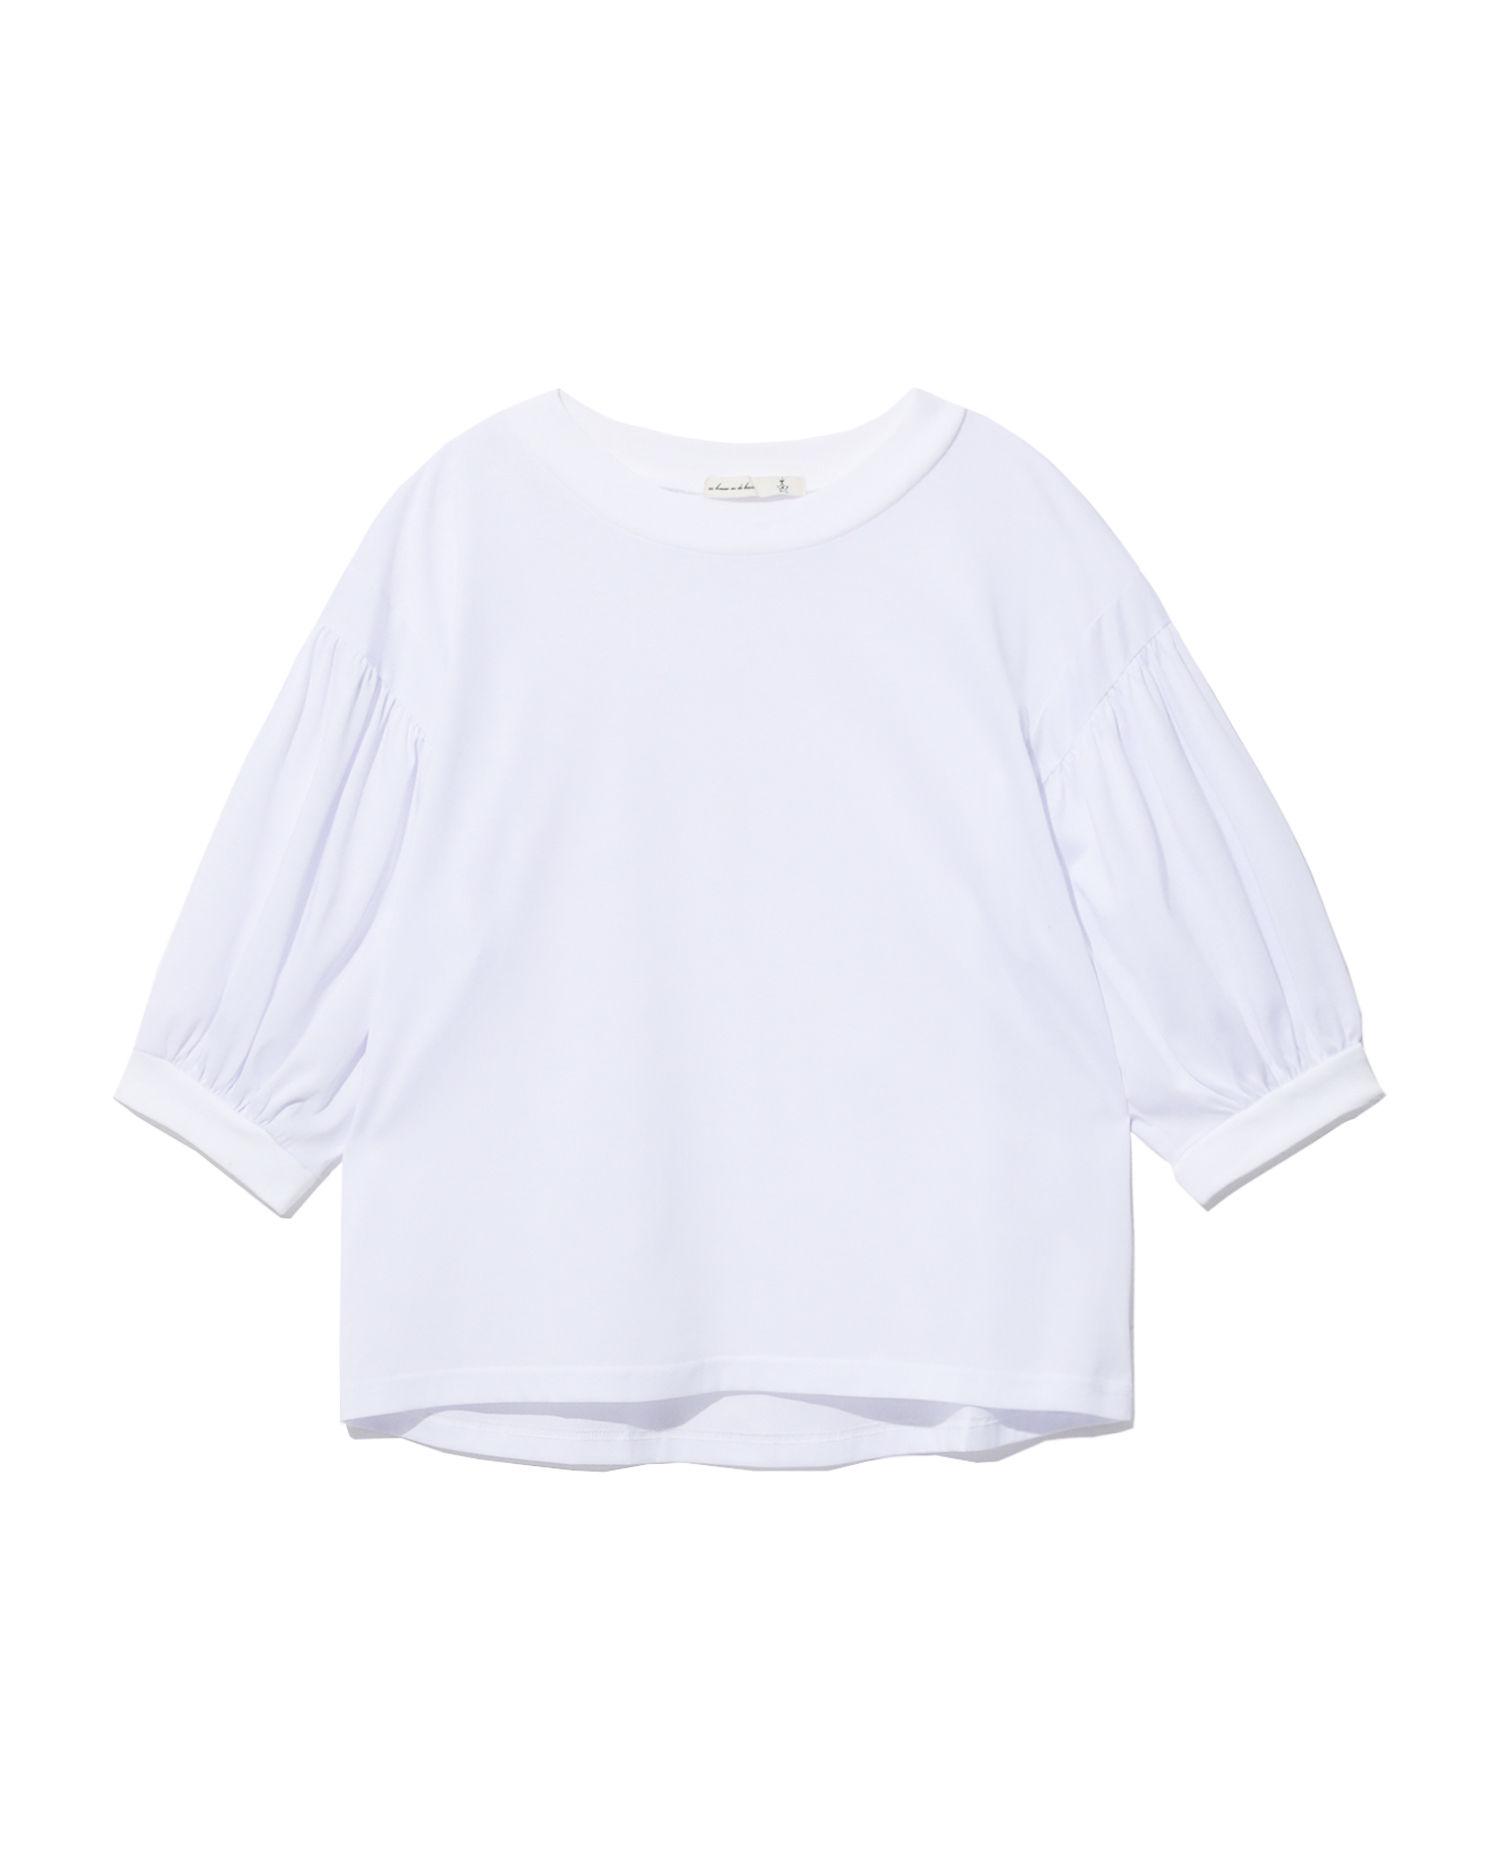 Gathered sleeve top by AS KNOW AS